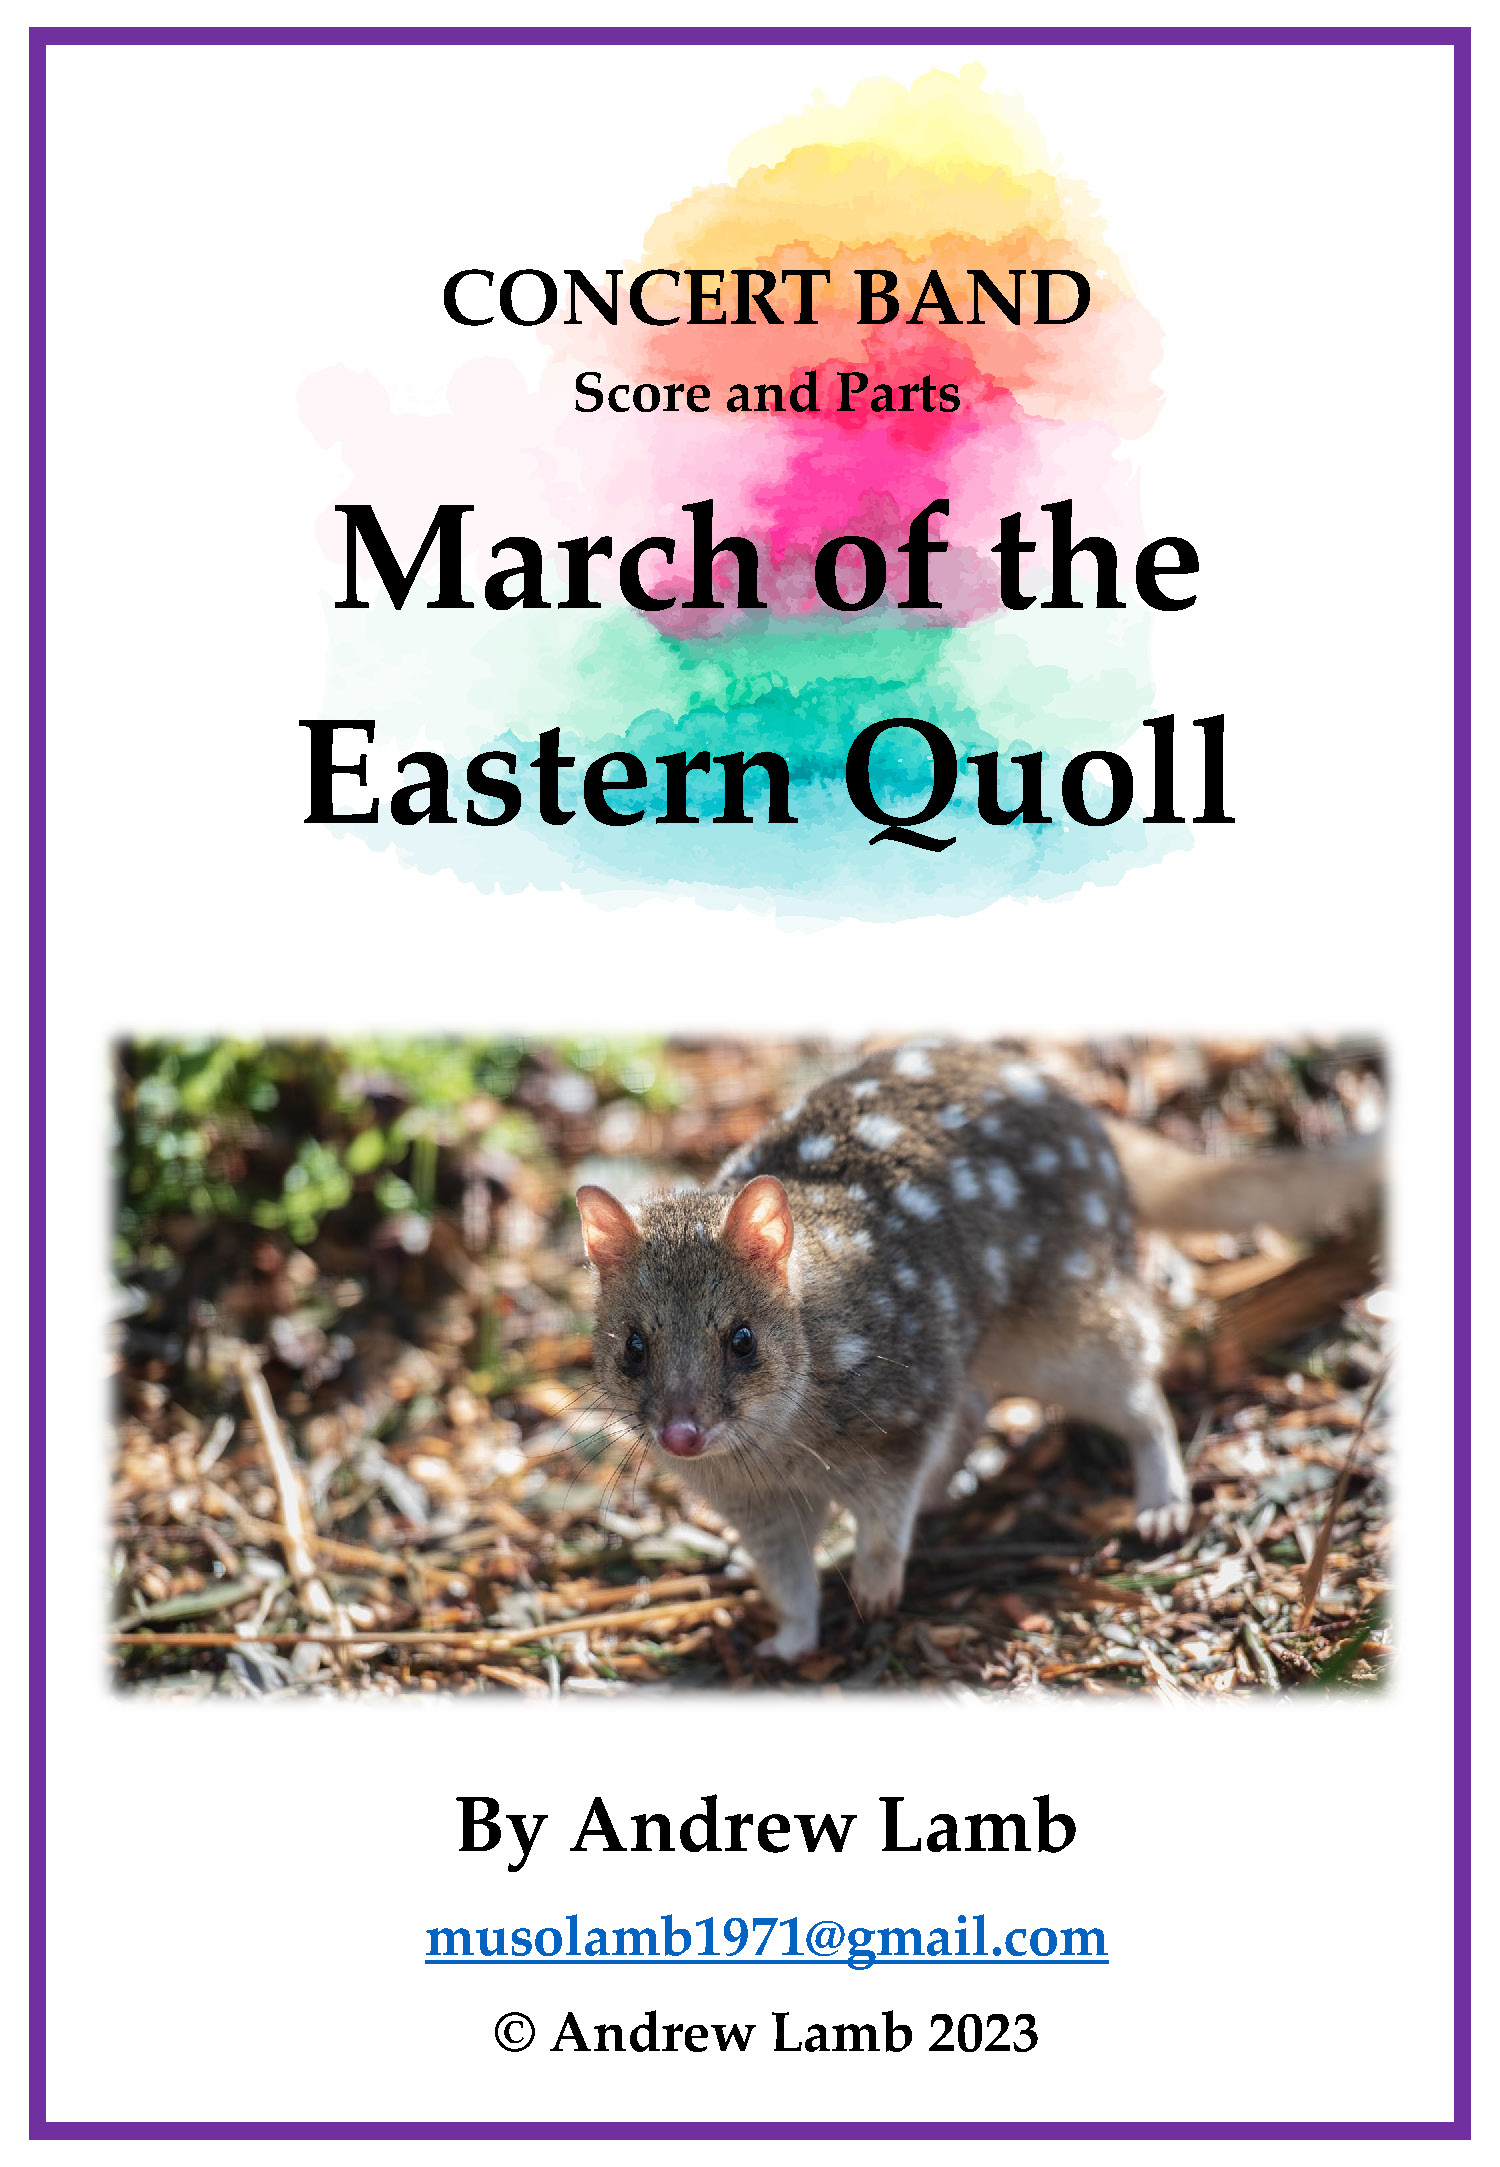 1 March of the Eastern Quoll Score and parts Page 01